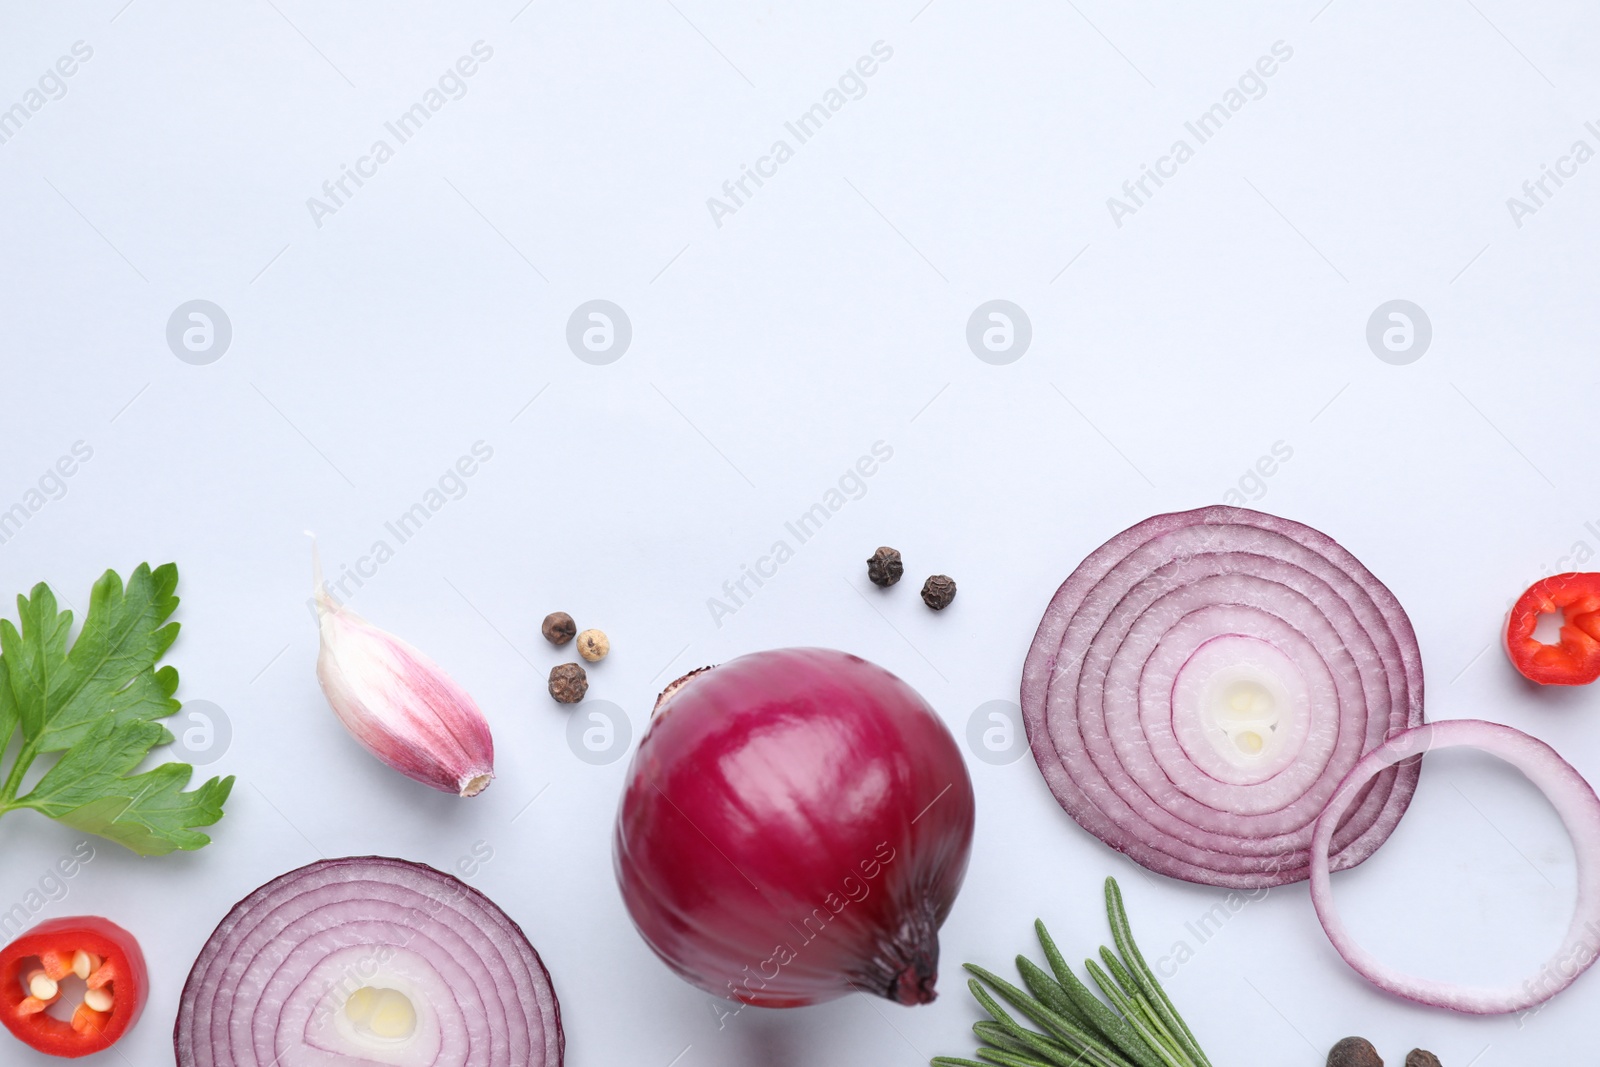 Photo of Flat lay composition with cut onion and spices on light background. Space for text